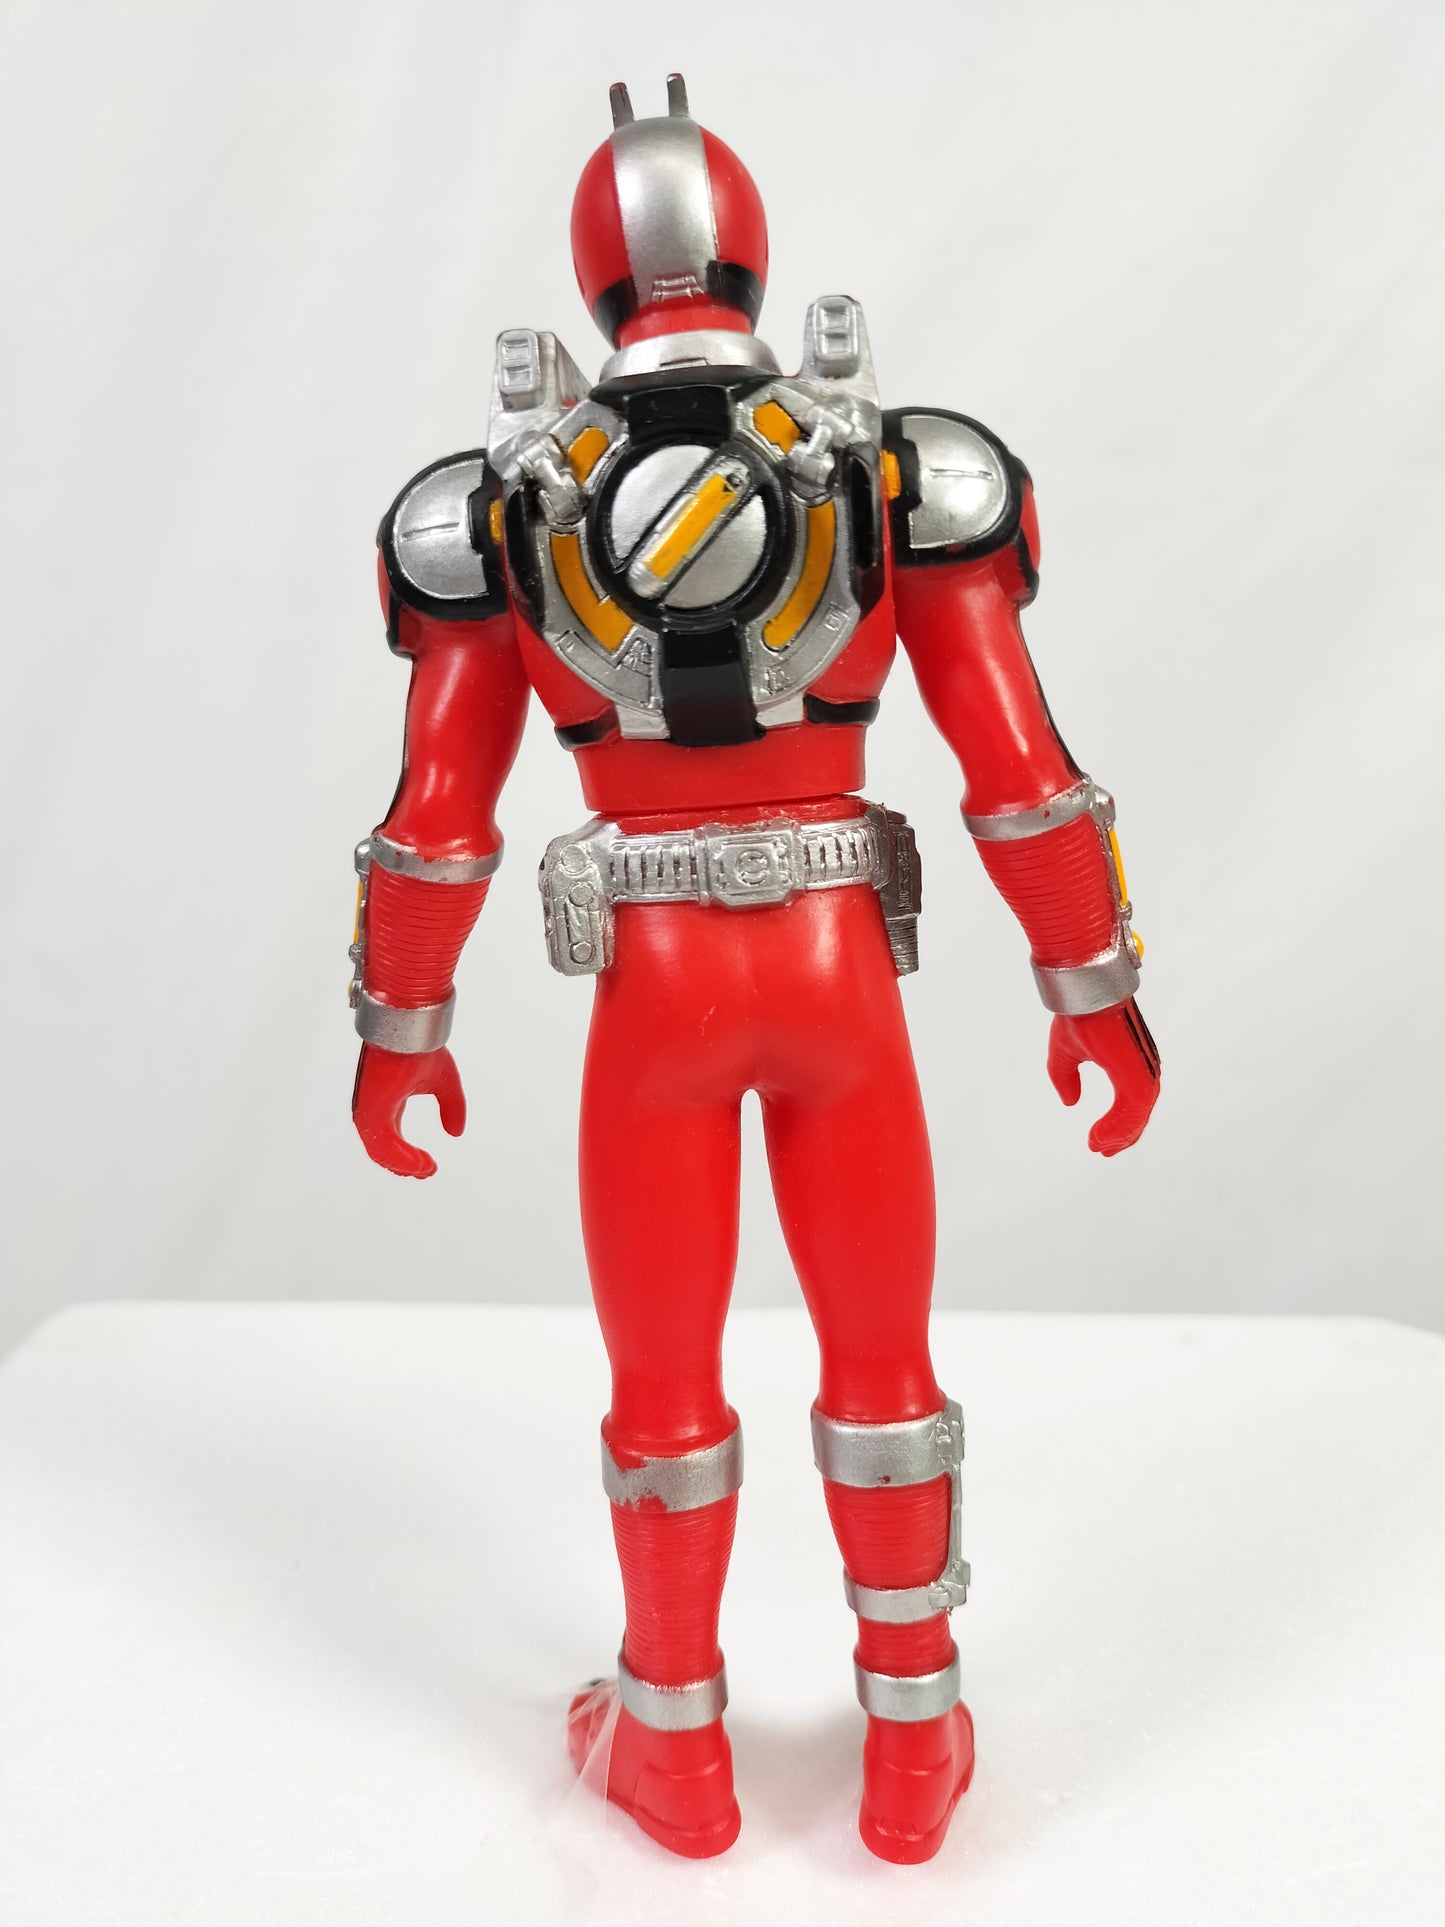 Kamen Rider 555 (Blaster Form) Made in China Height about 17cm Manufactured in 2003 Sofvi Figure retro vintage major scratches and dirt